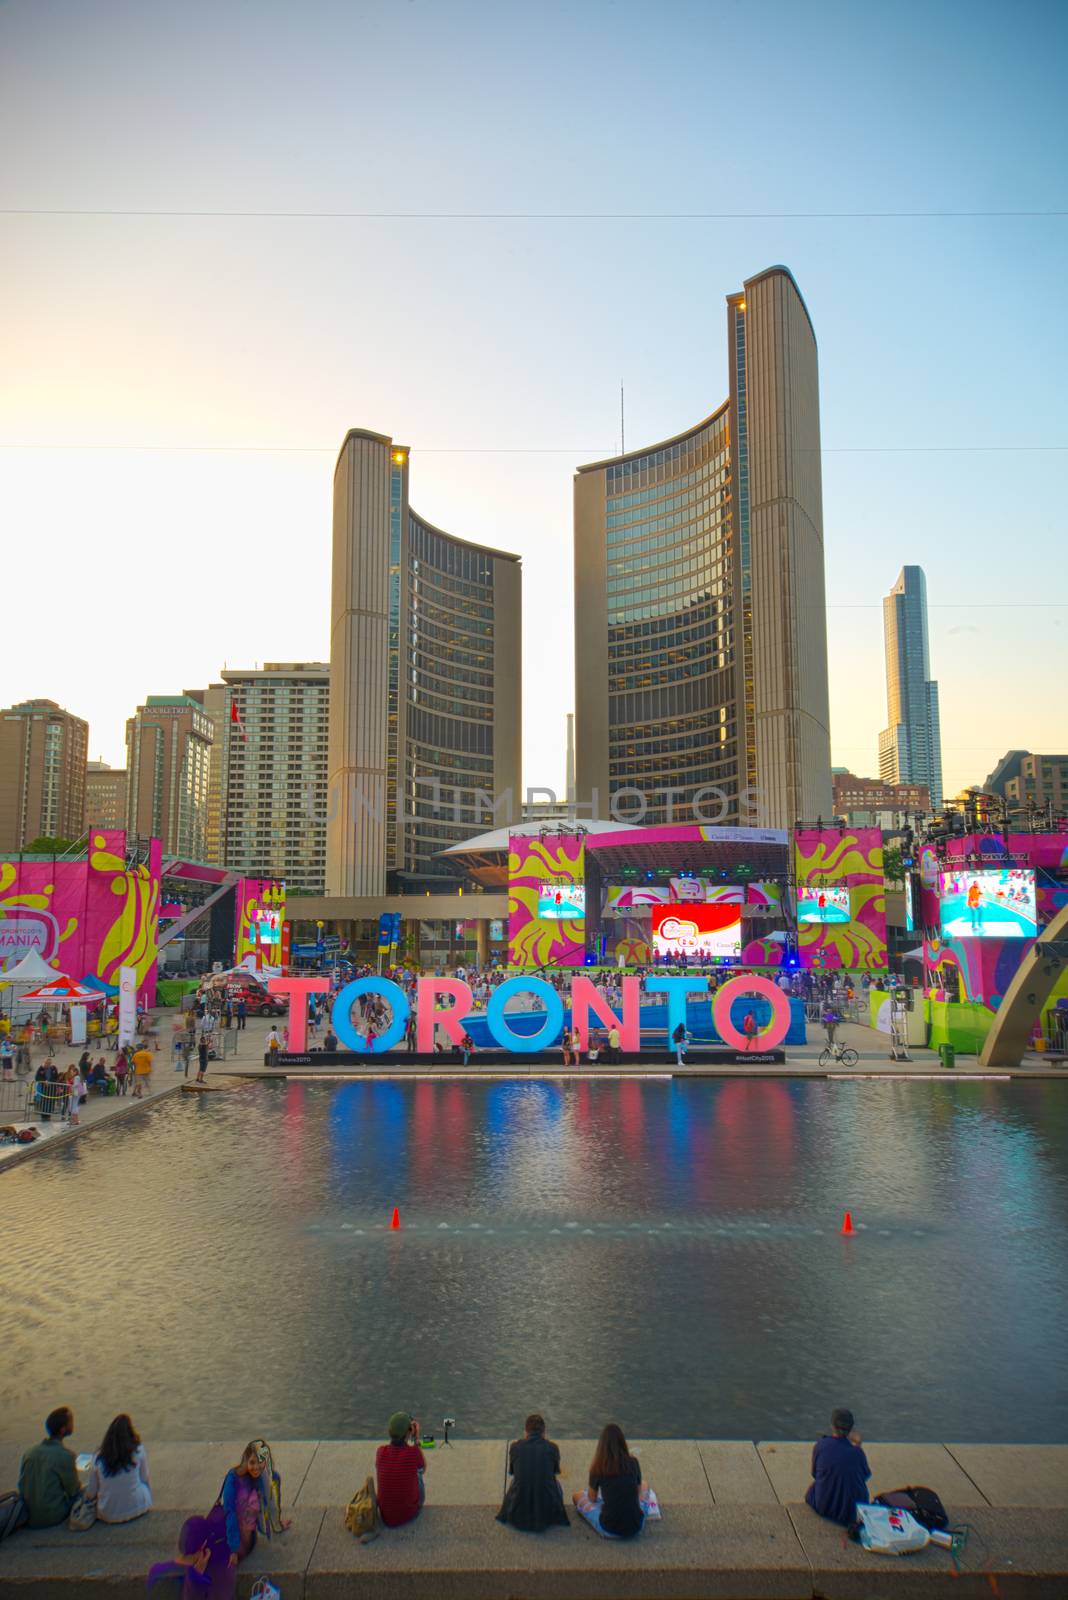 TORONTO,CANADA-JULY 9,2015: The new Toronto sign in Nathan Phillips Square celebrating the PanAm games, the New City Hall at back. Stage have been mounted to held a constant party called Panamania